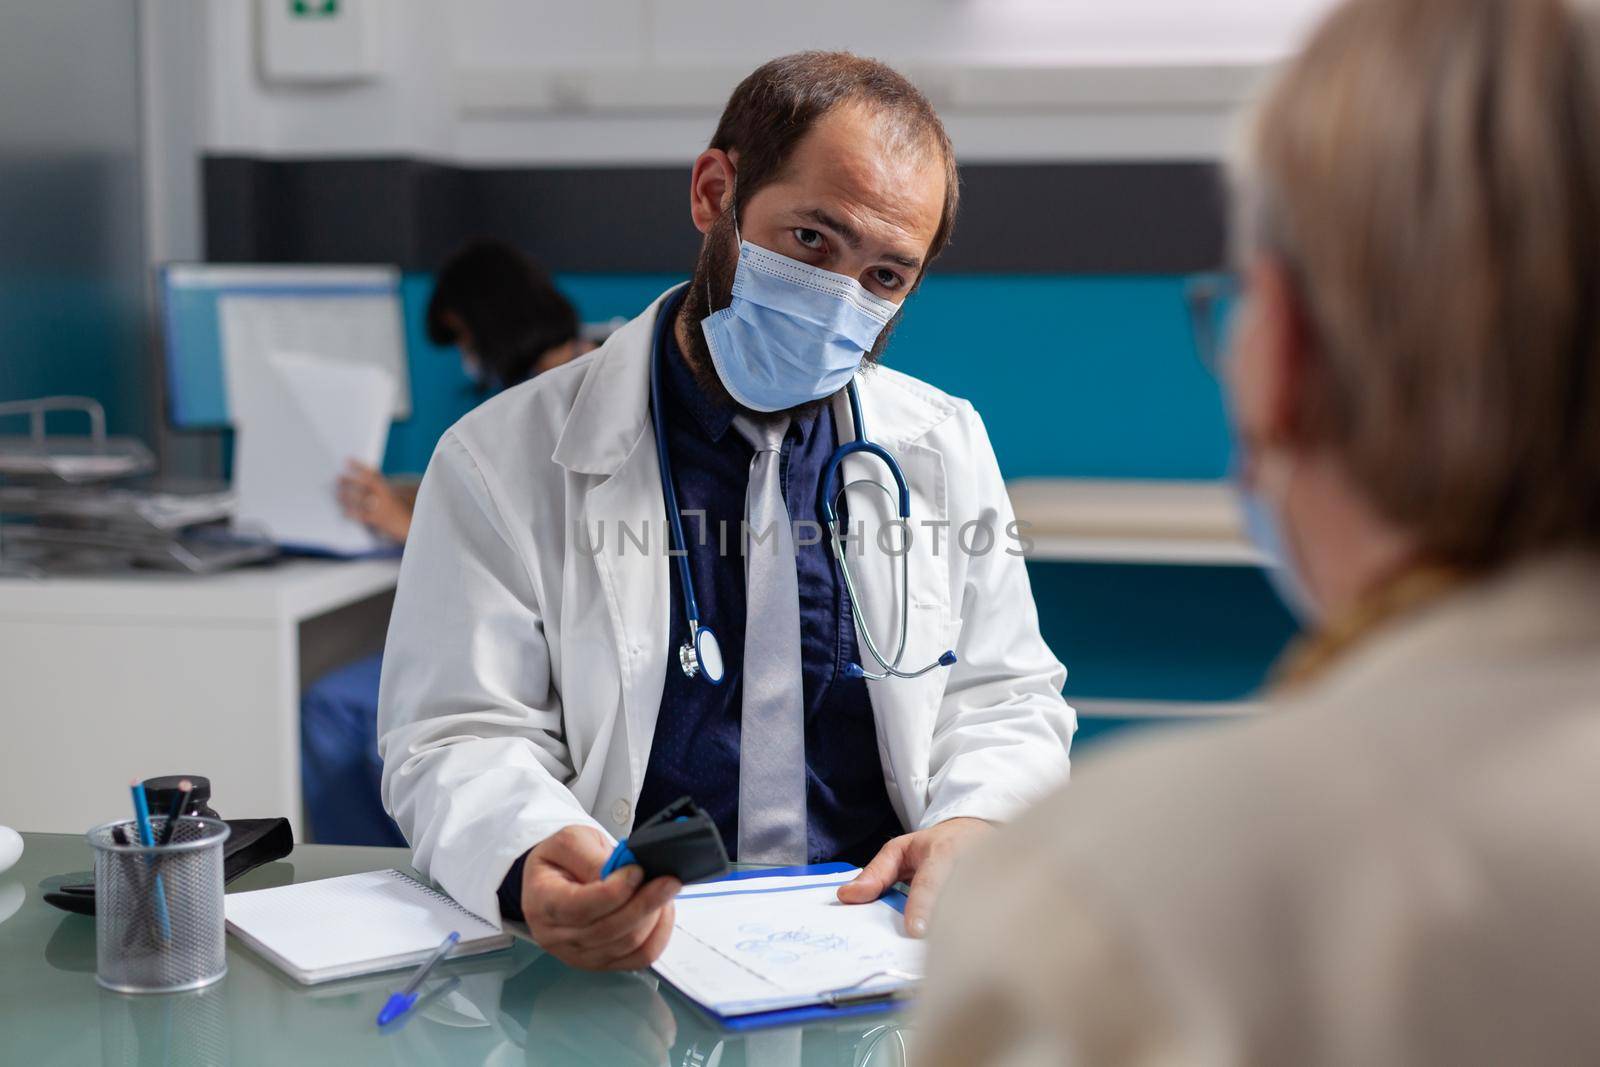 Doctor putting medical seal on prescription paper, giving medicine to senior patient at examination. General practitioner using stamp on consultation report during covid 19 pandemic.